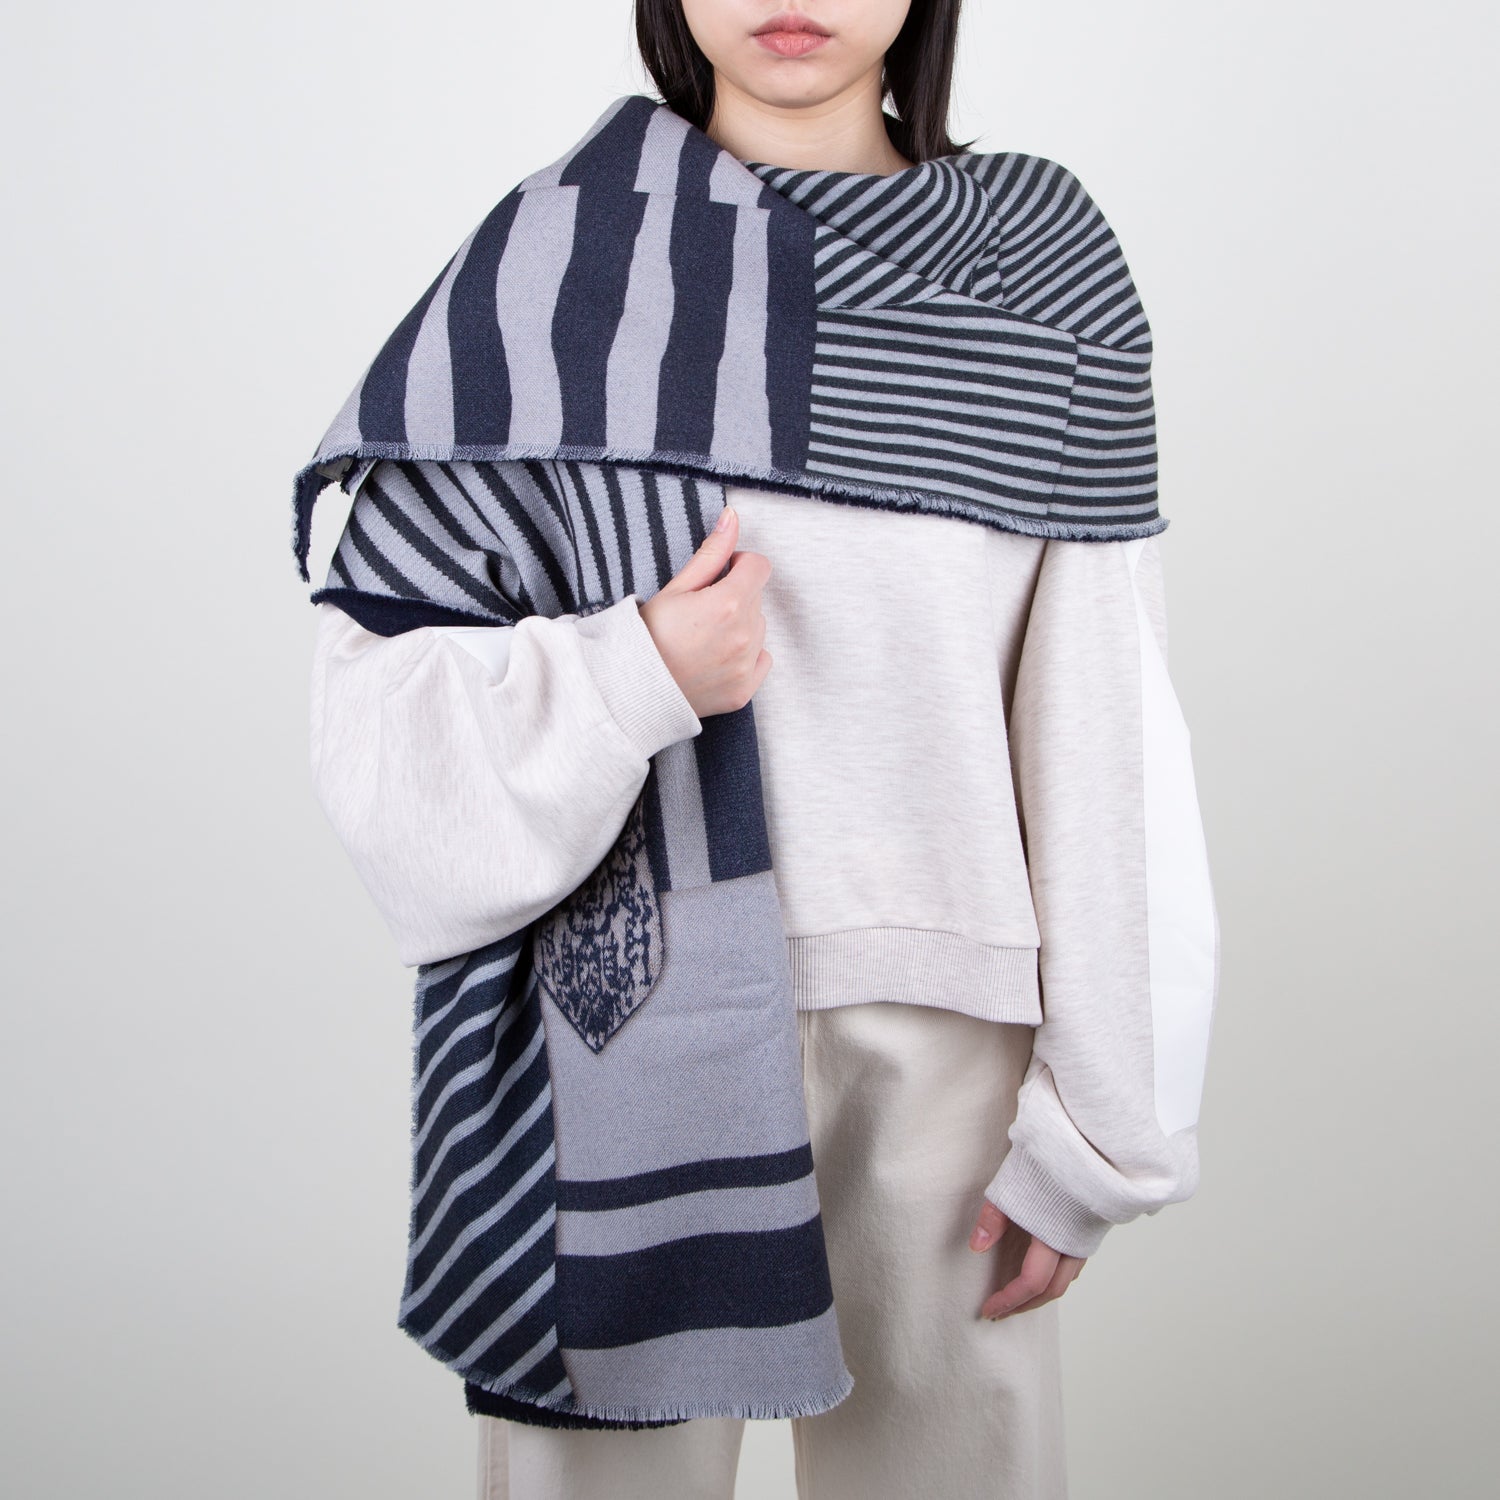 wool printed scarf in navy and grey luxury design